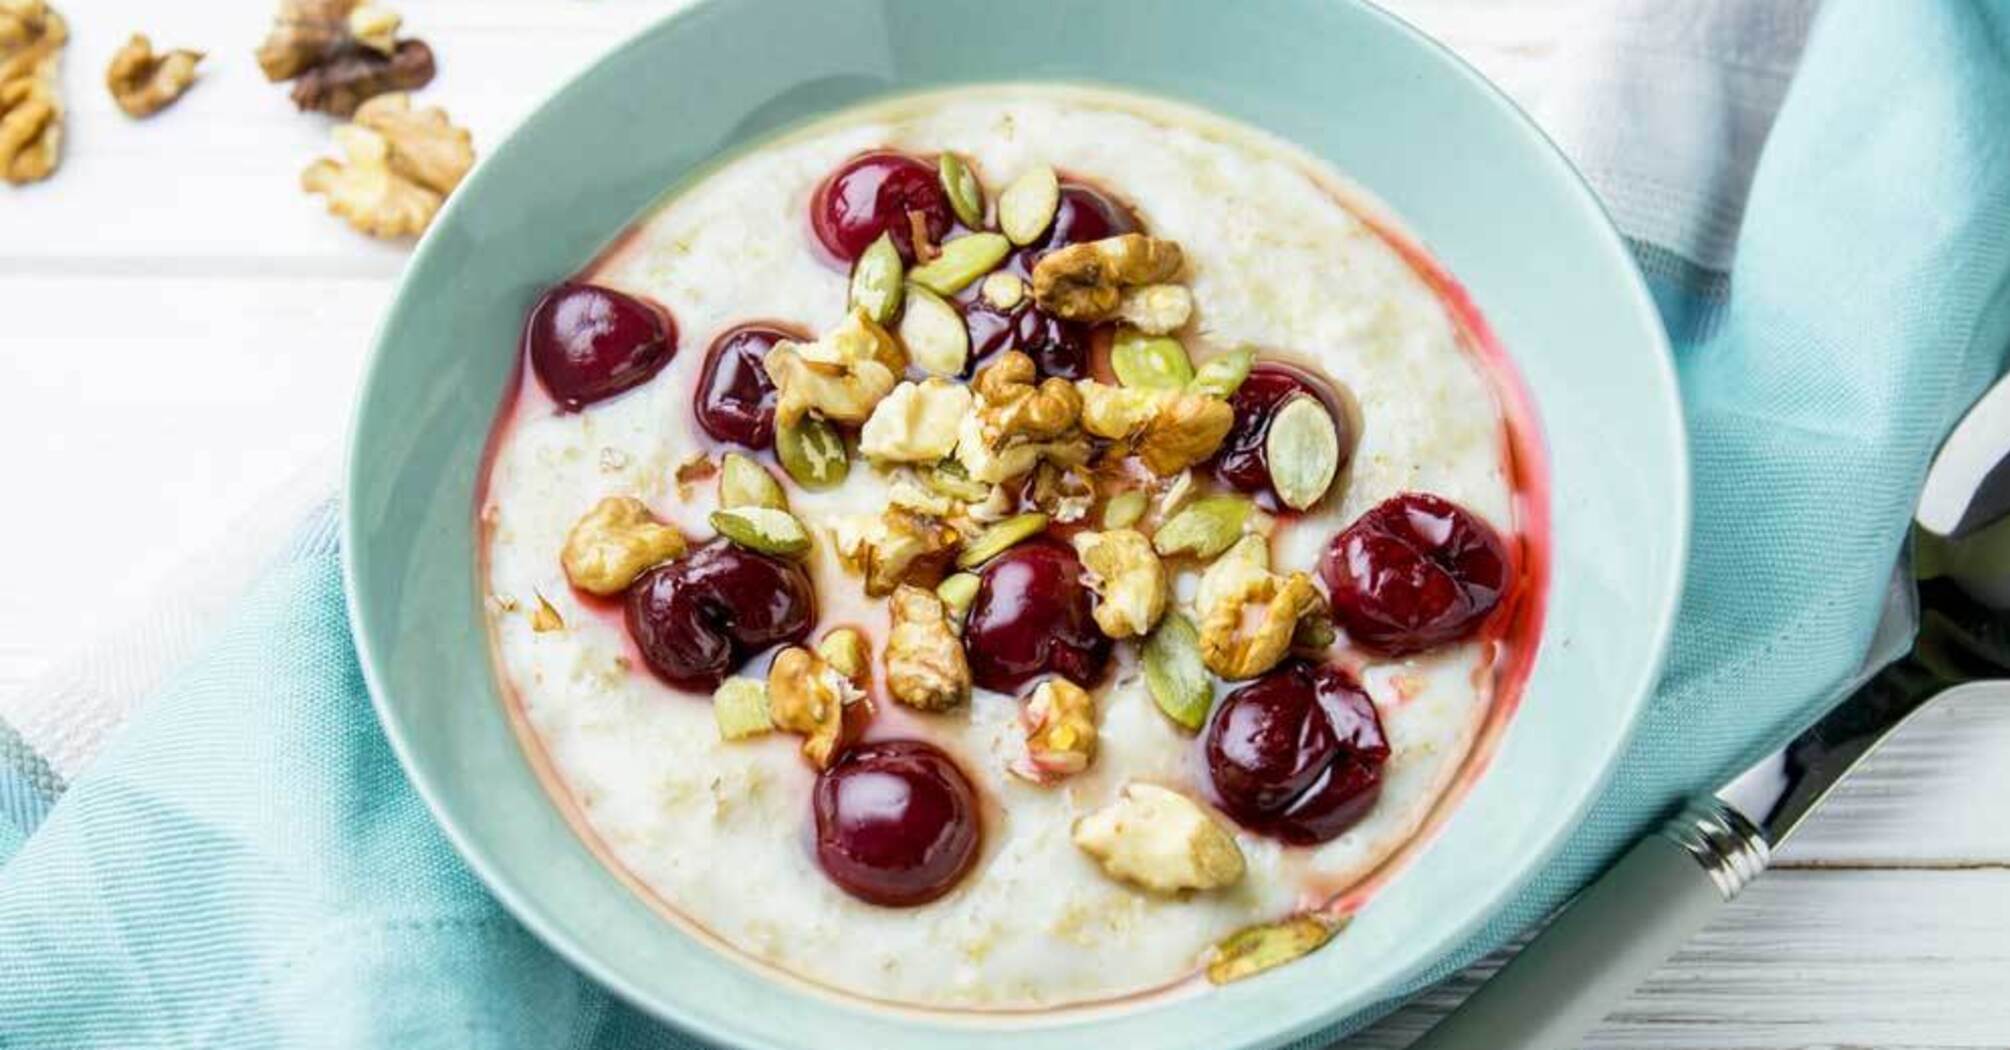 Oatmeal with cherries